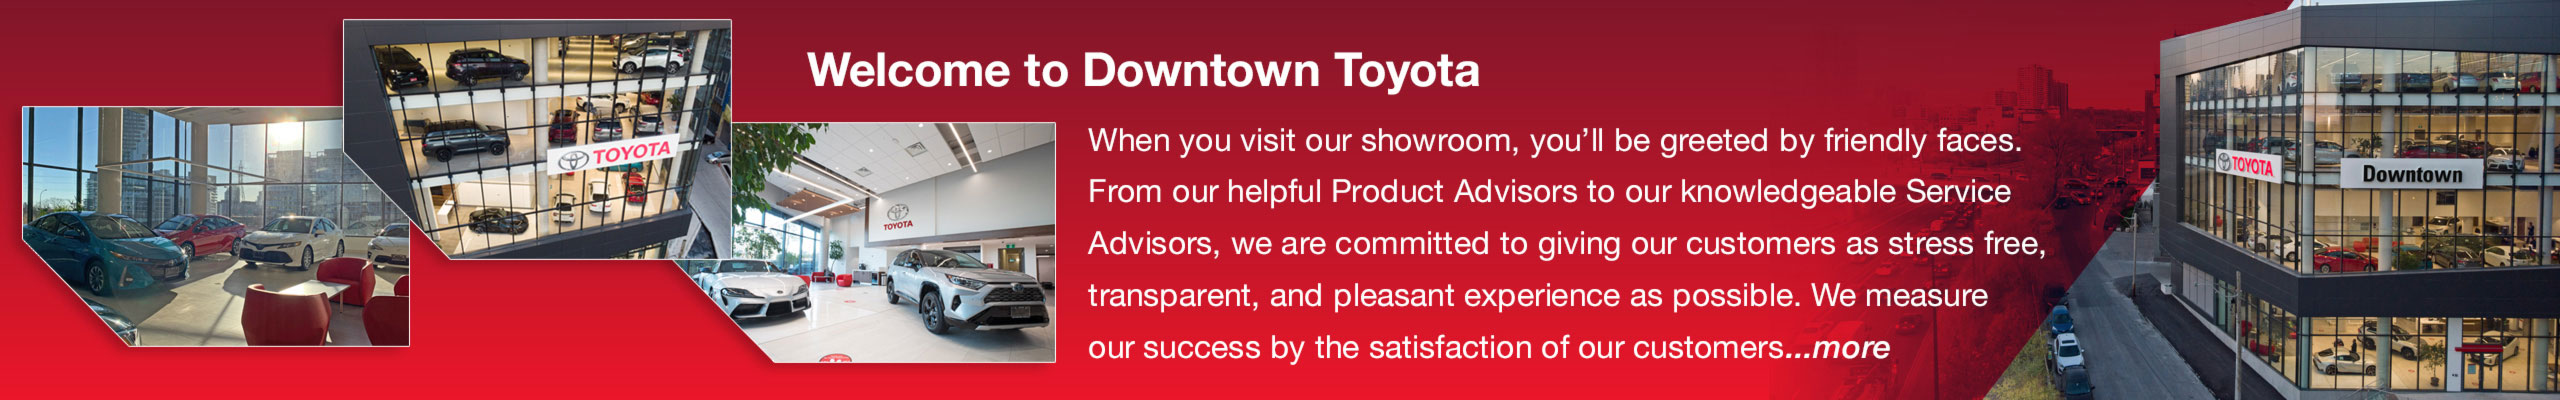 Welcome to Downtown Toyota, located in Toronto, ON.